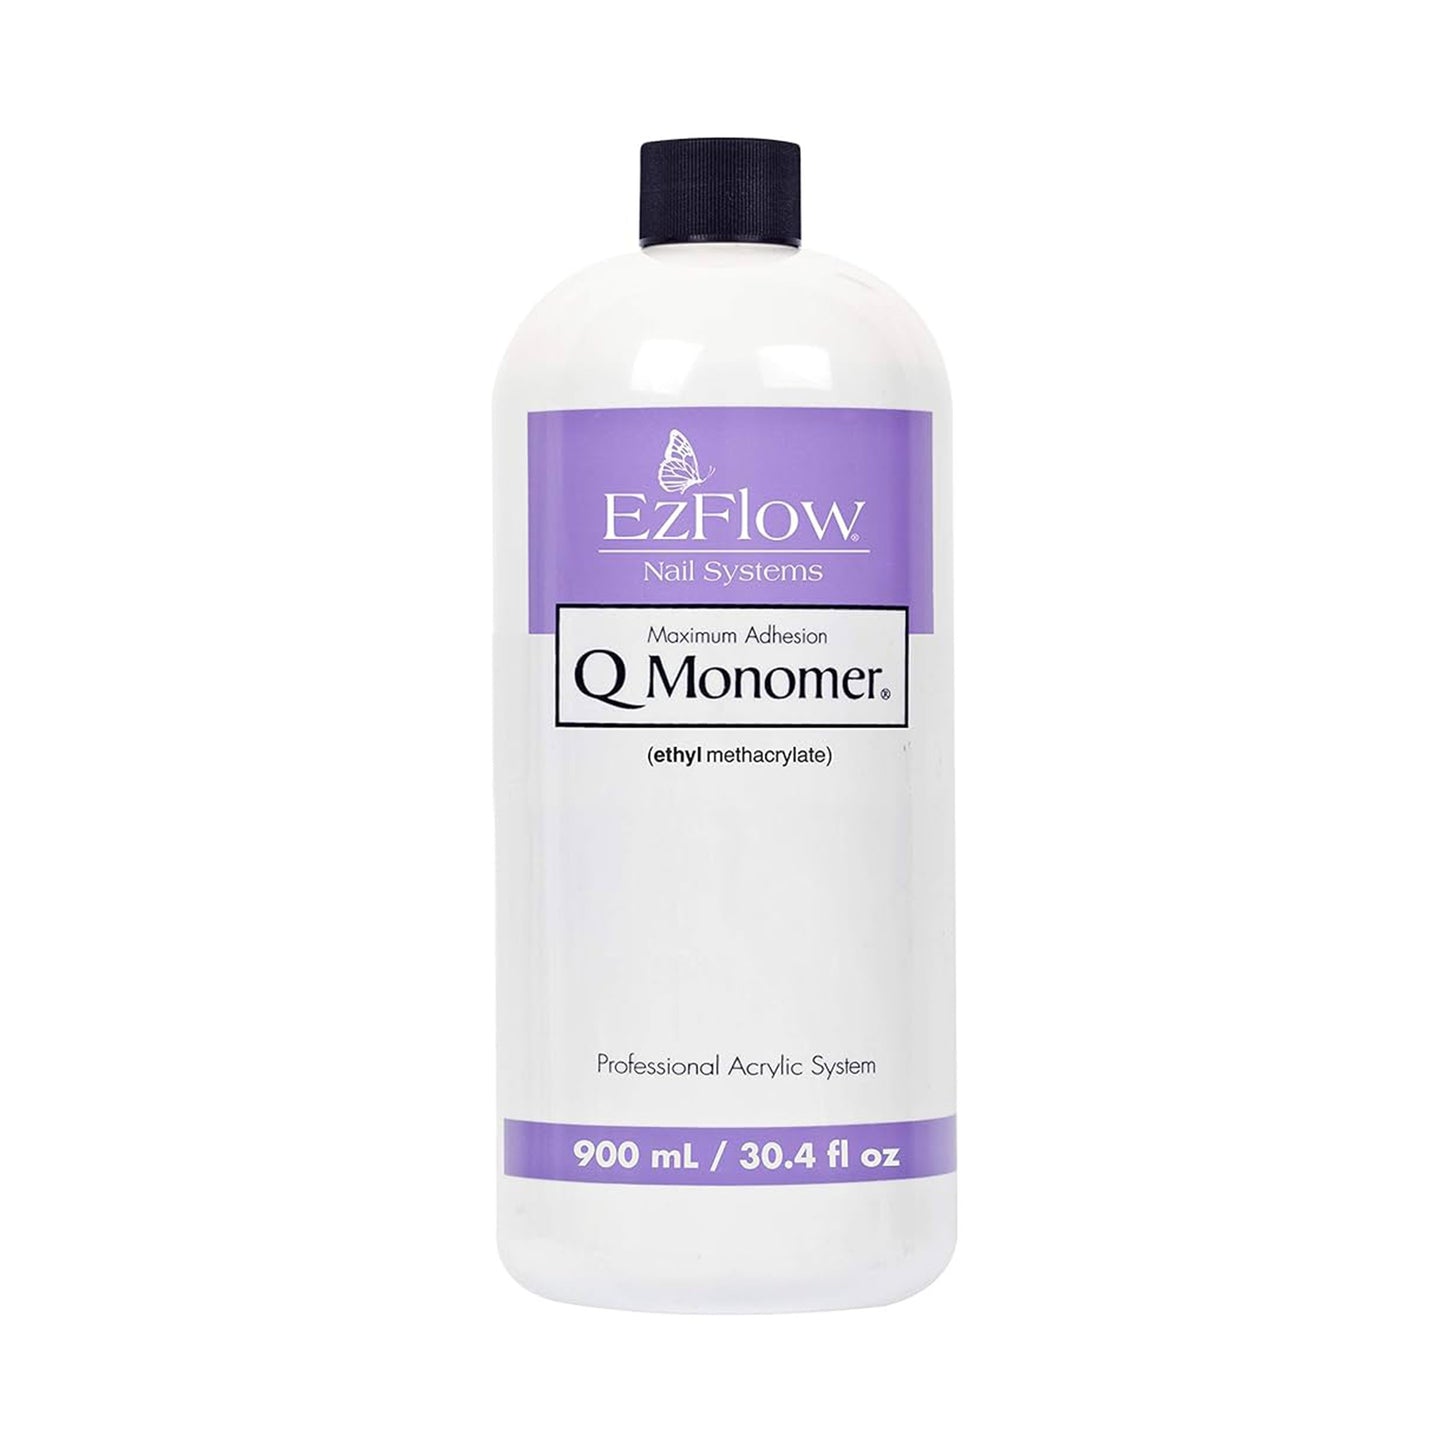 Other Products - EZFLOW Monomer